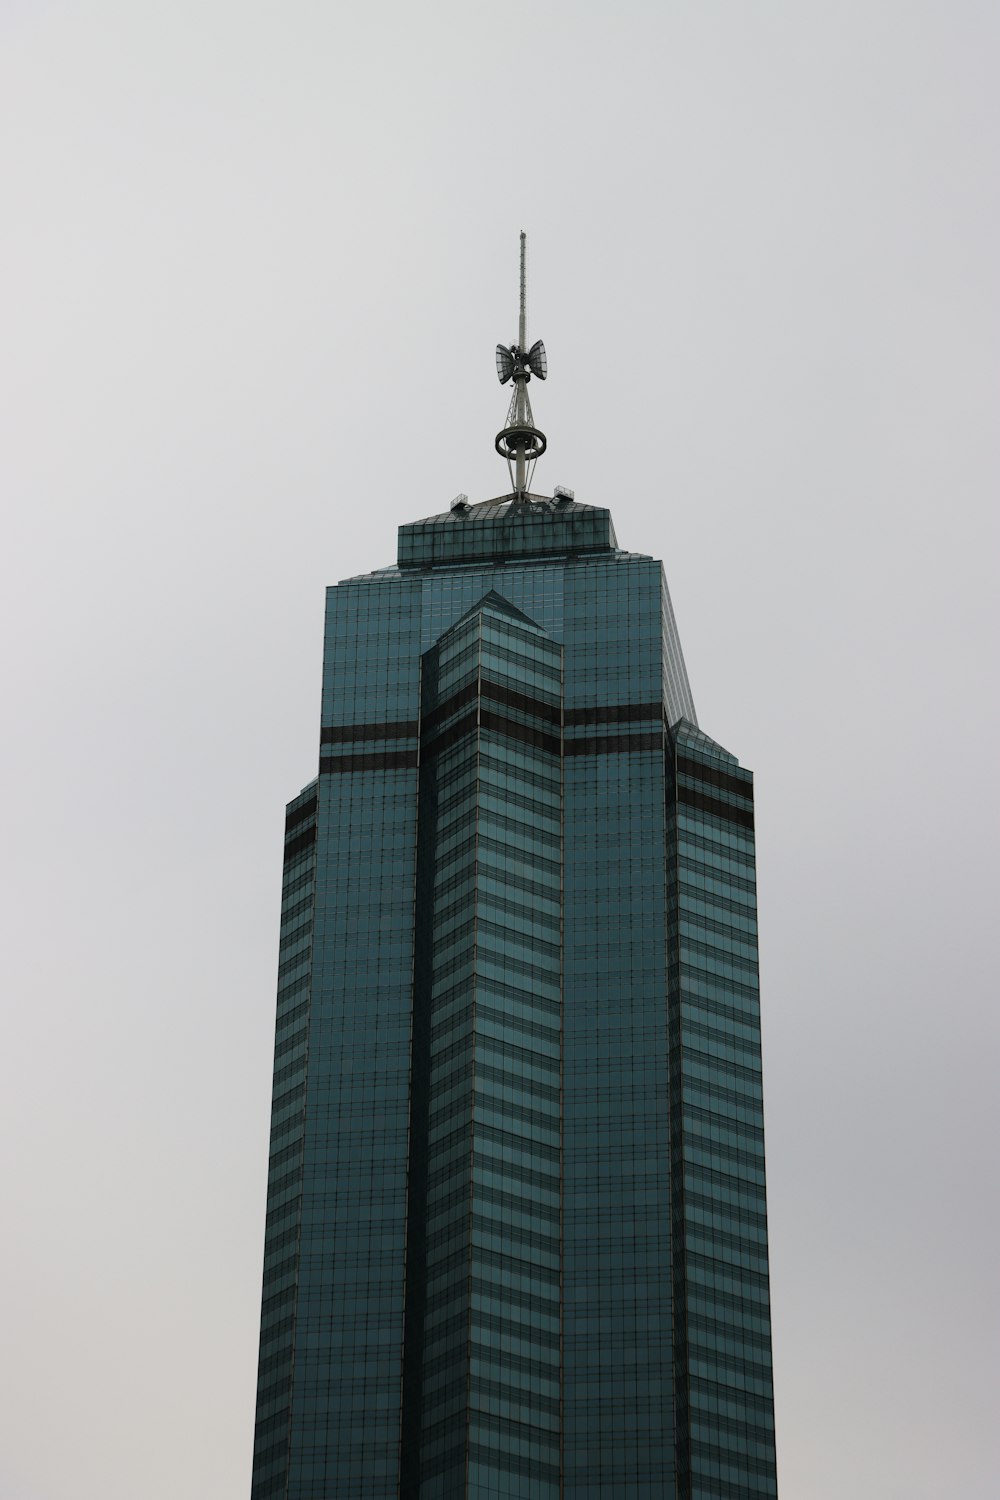 a tall building with a weather vane on top of it